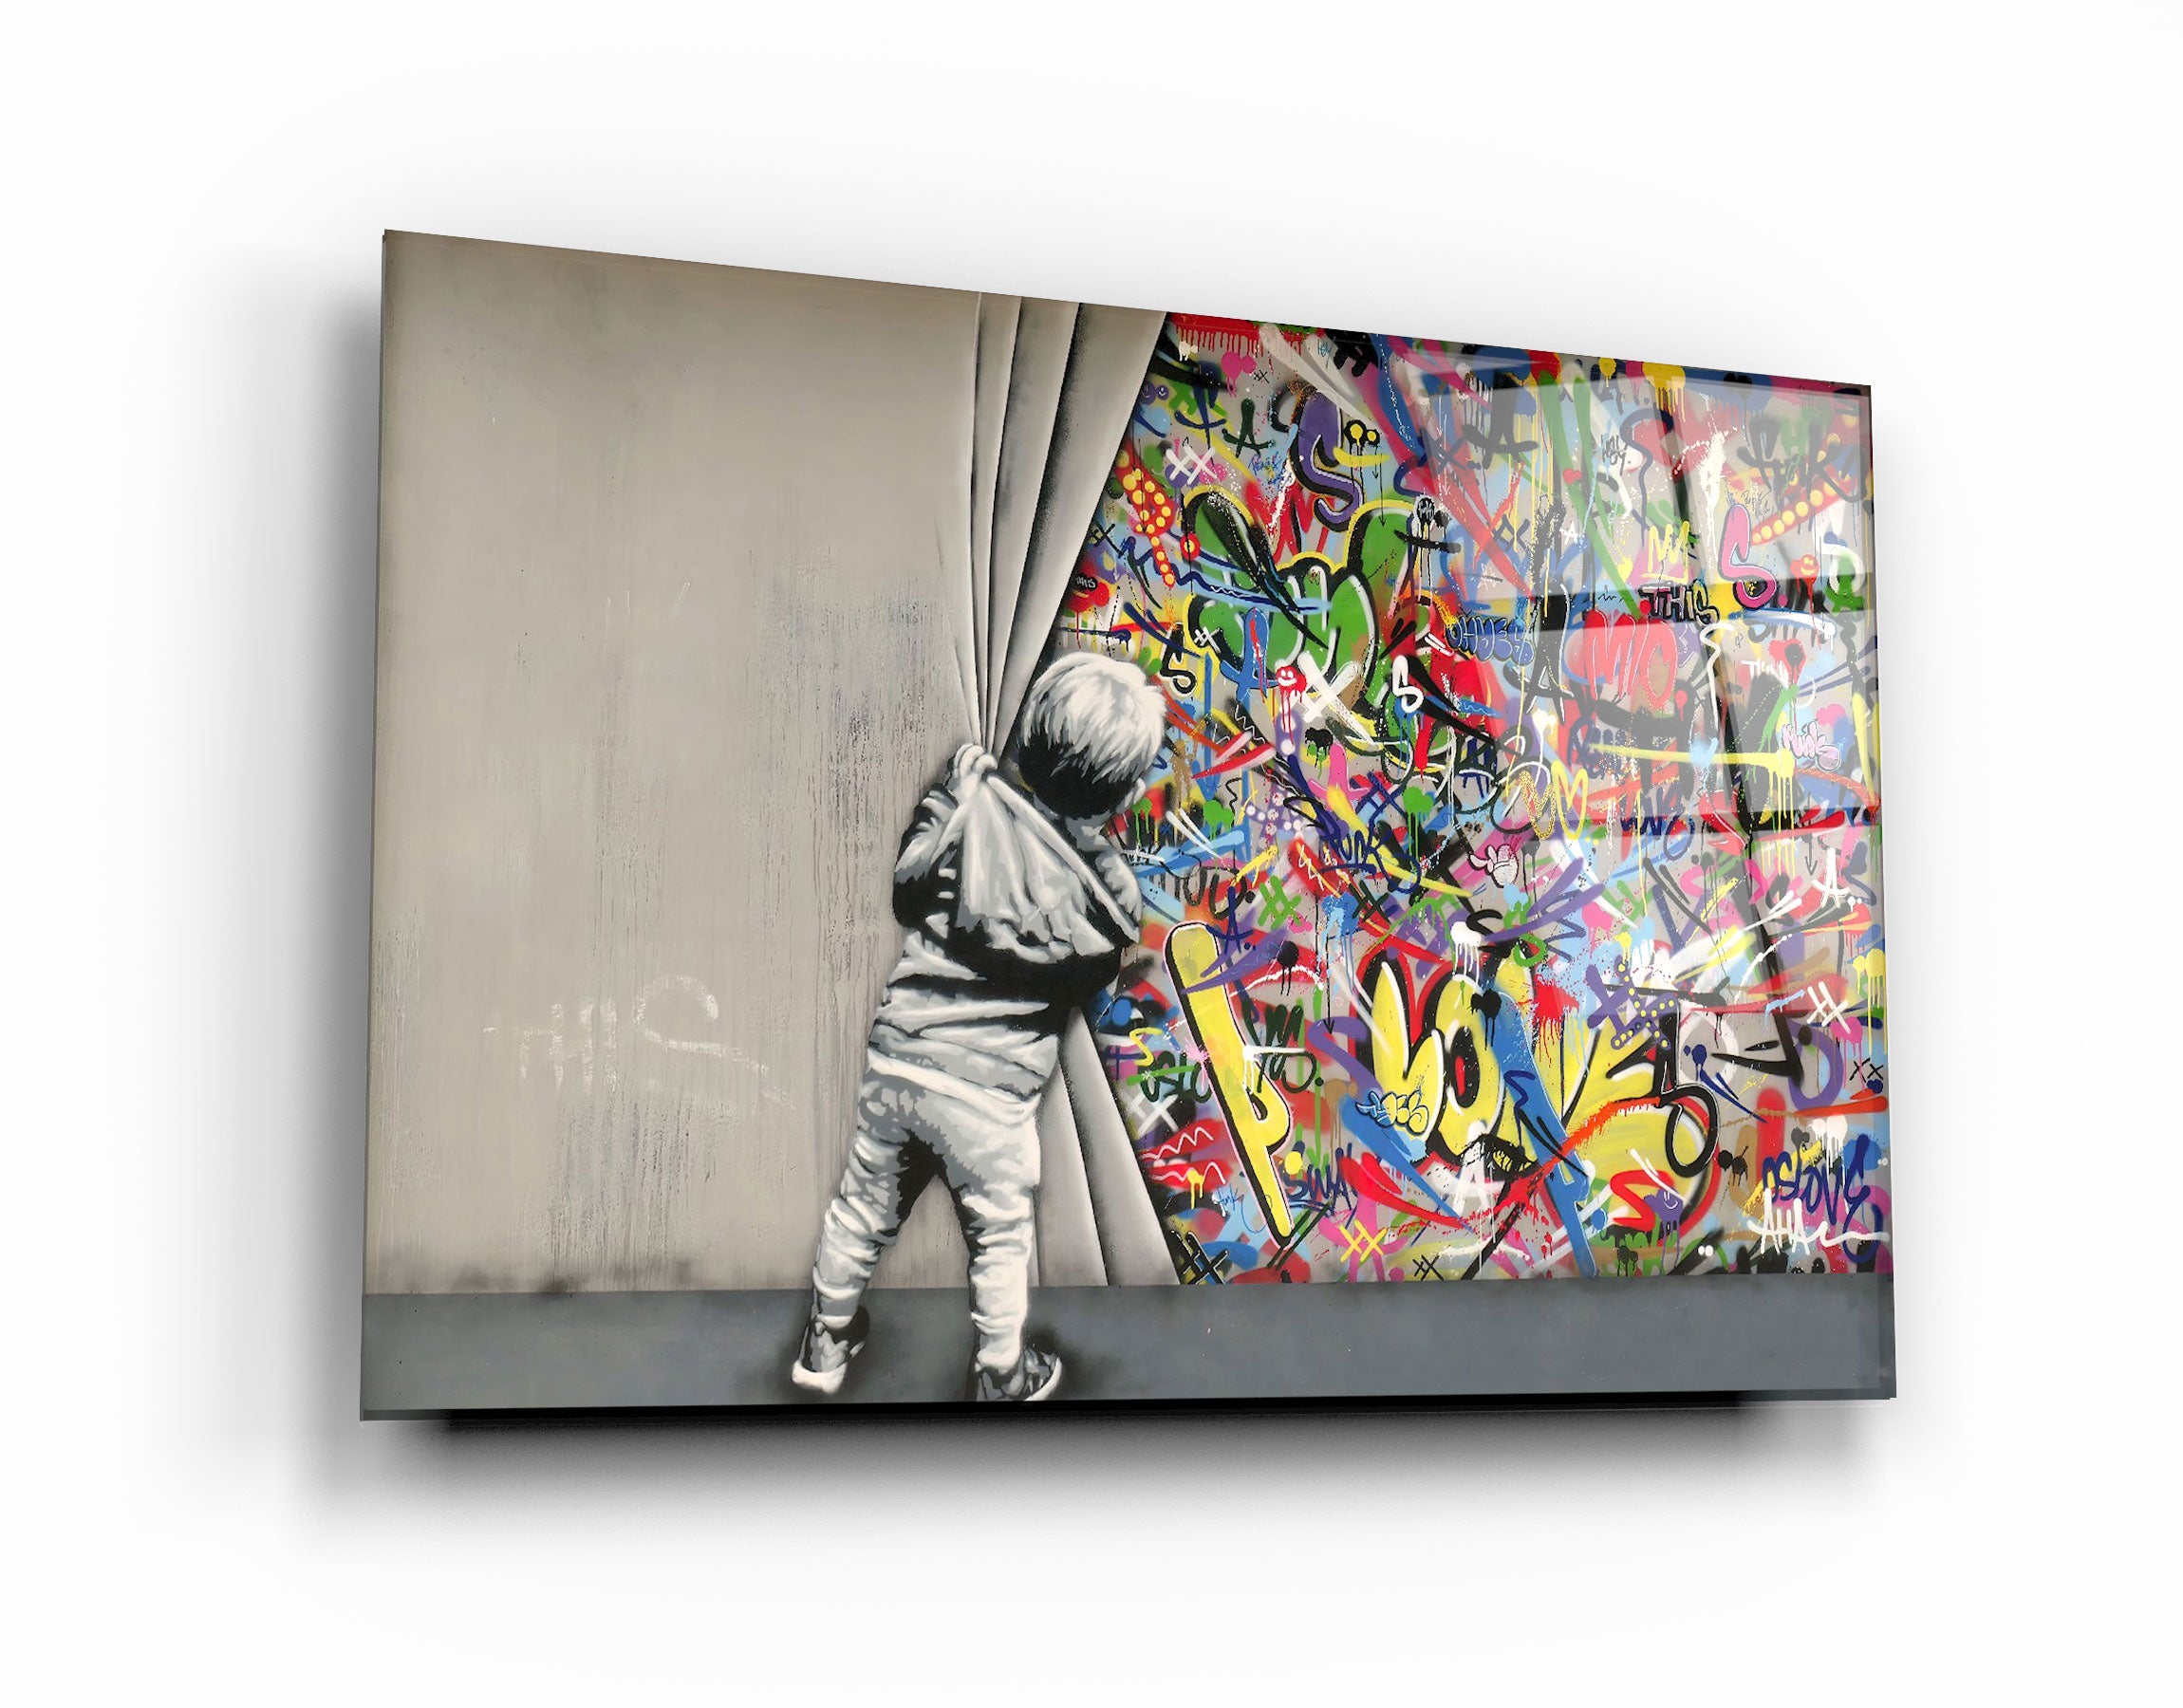 ・"BANKSY - Pull Back the Curtain"・GLASS WALL ART